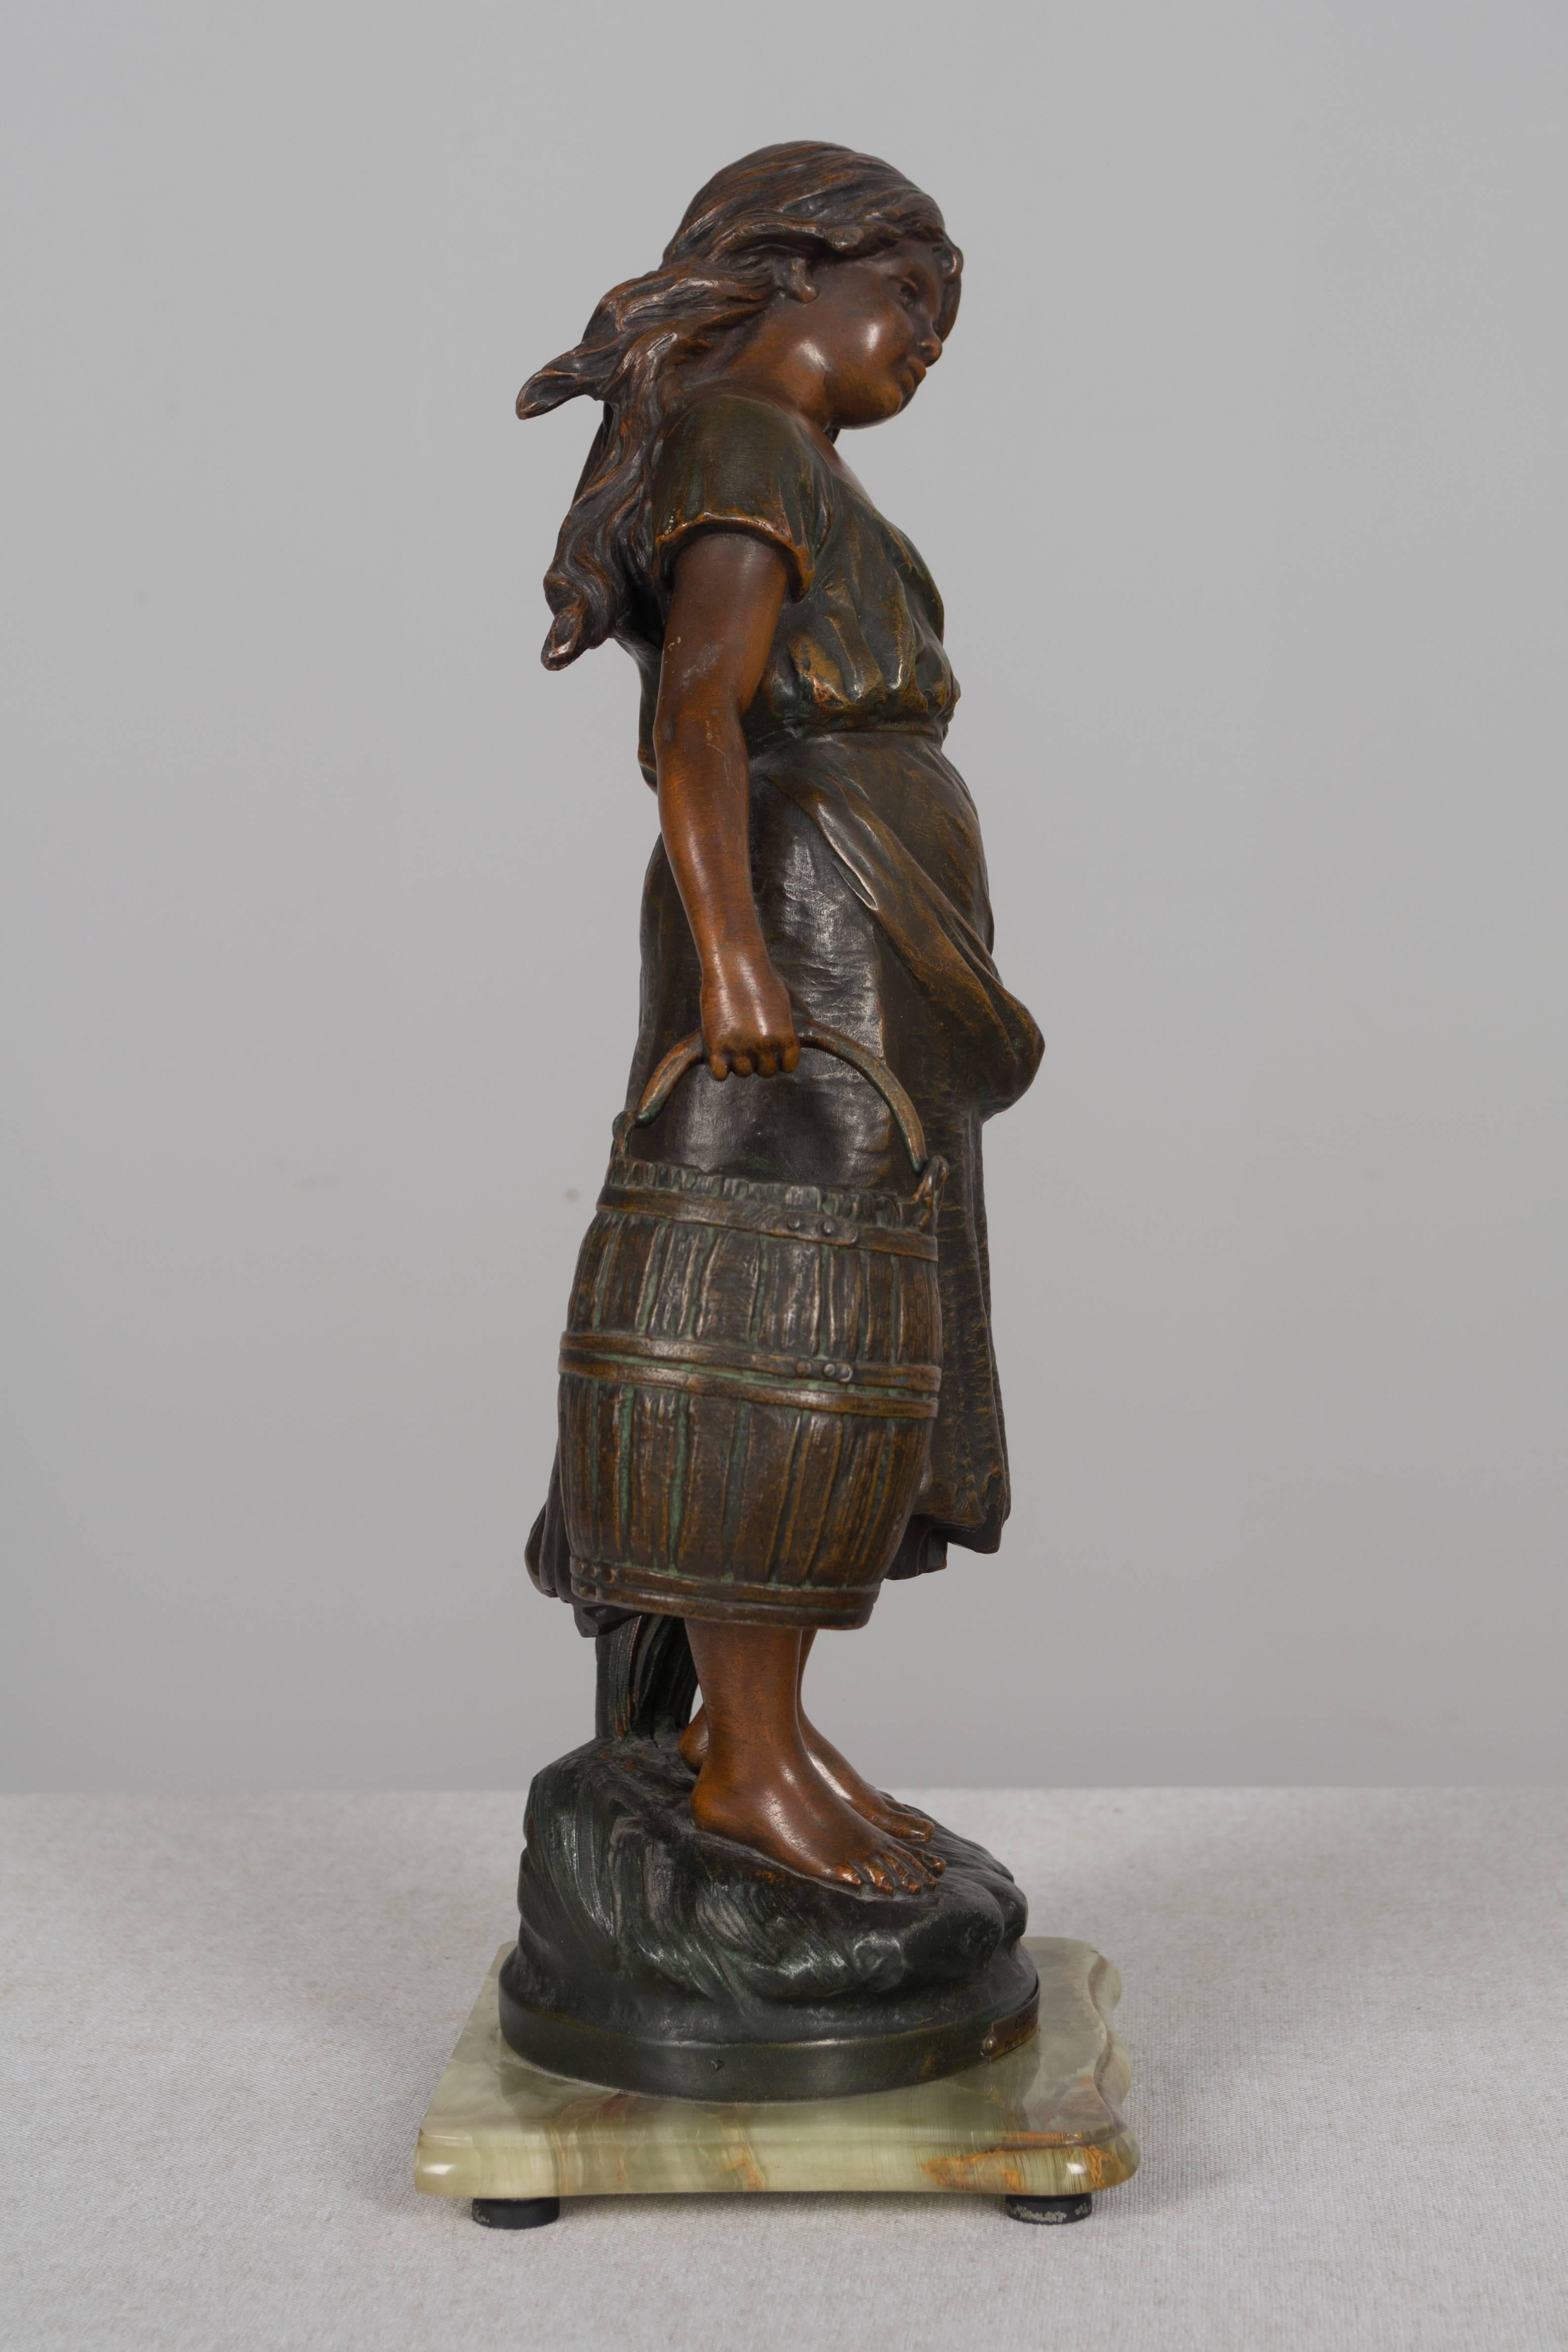 A 19th century French pot metal sculpture by Auguste Moreau (1834-1917) depicting Cosette, a fictional character in the novel Les Miserables by Victor Hugo. The base front has a stamped brass plaque: COSETTE par L. et F. Moreau (Medaille d'Or). Well